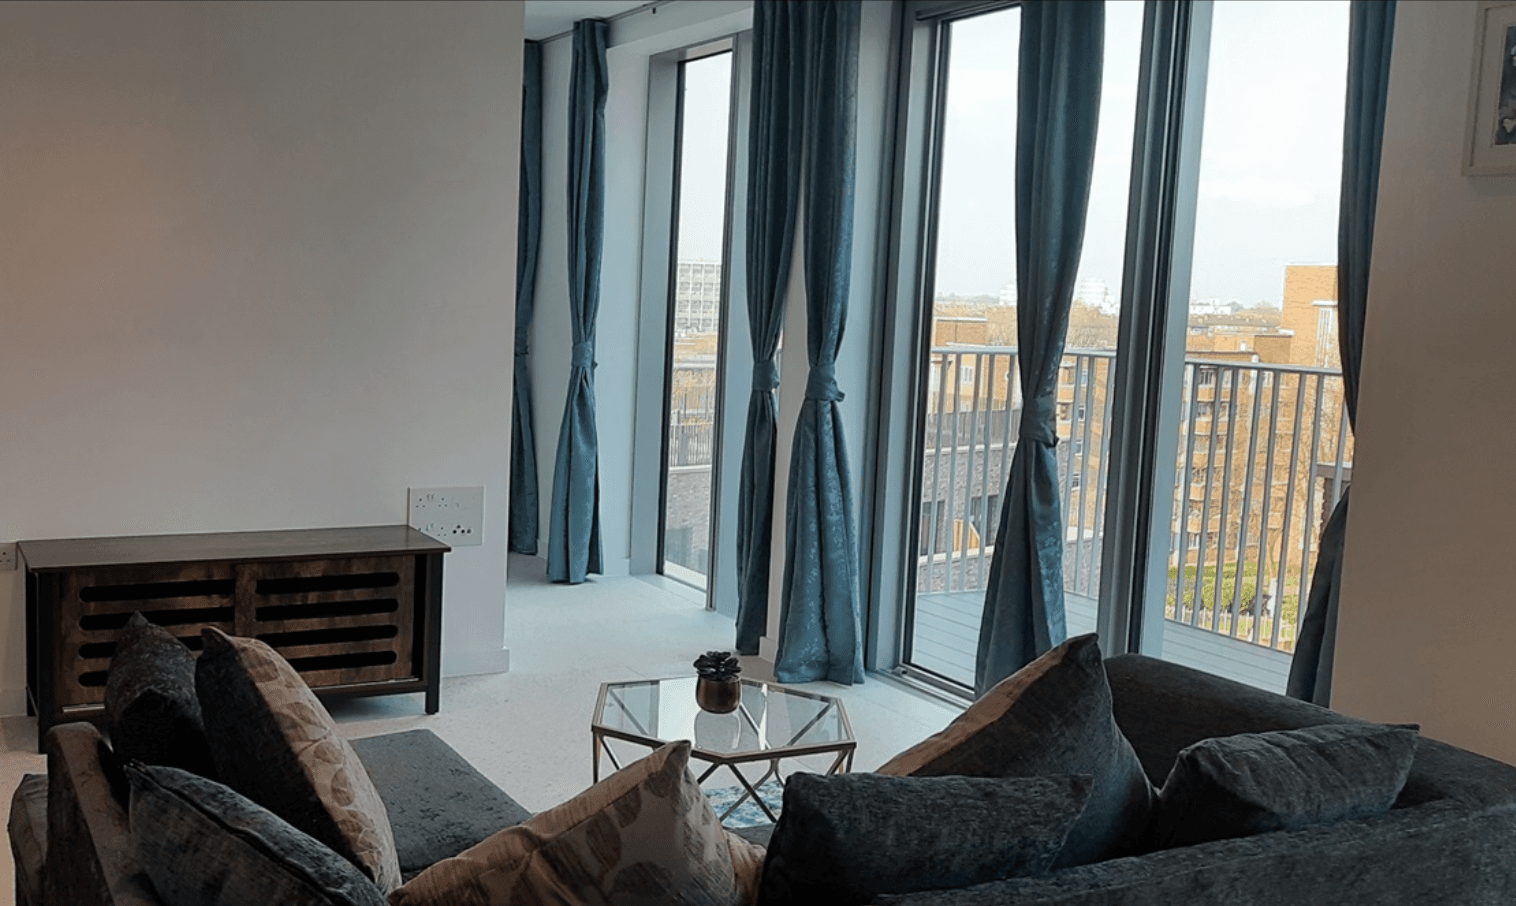 This apartment boasts open plan living / dining area, large balcony, double bedroom with large fitted wardrobes, luxury bathroom, fully fitted kitchen, tiled flooring and excellent storage space.